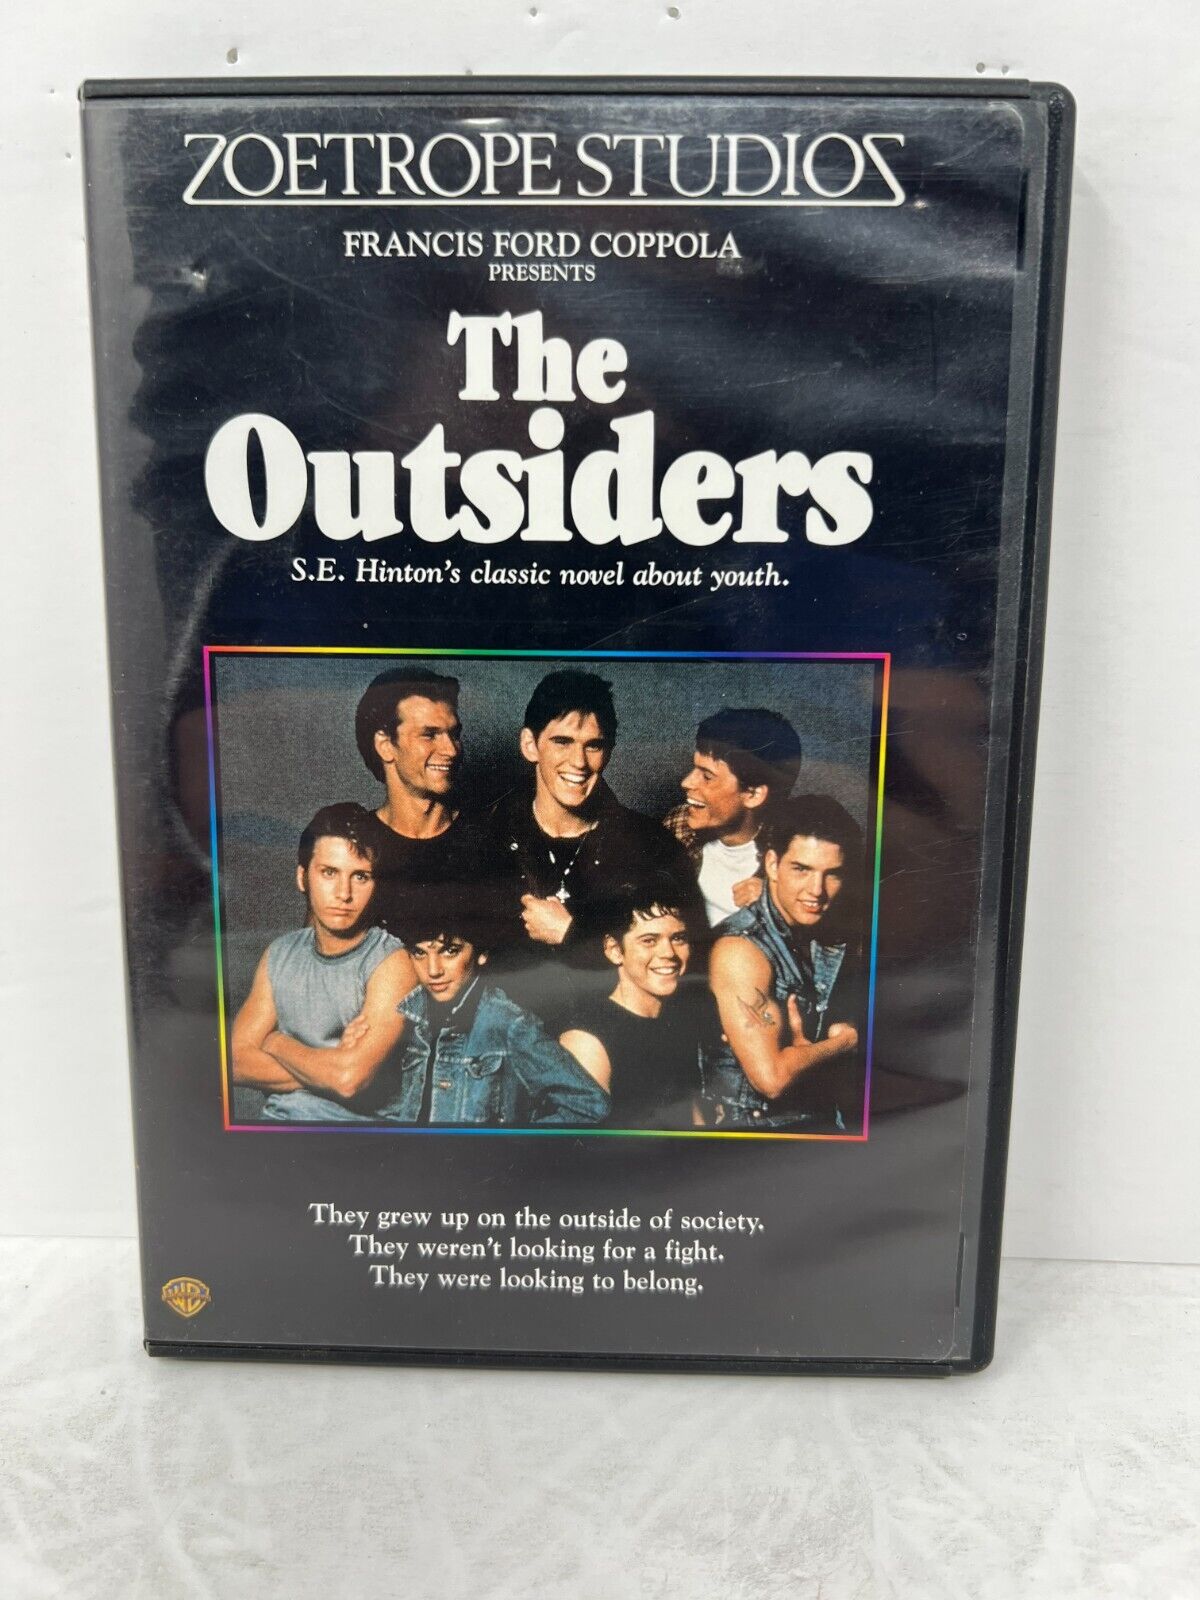 The Outsiders (DVD, 2008) Francis Ford Coppola Crime Drama Good Condition!!!